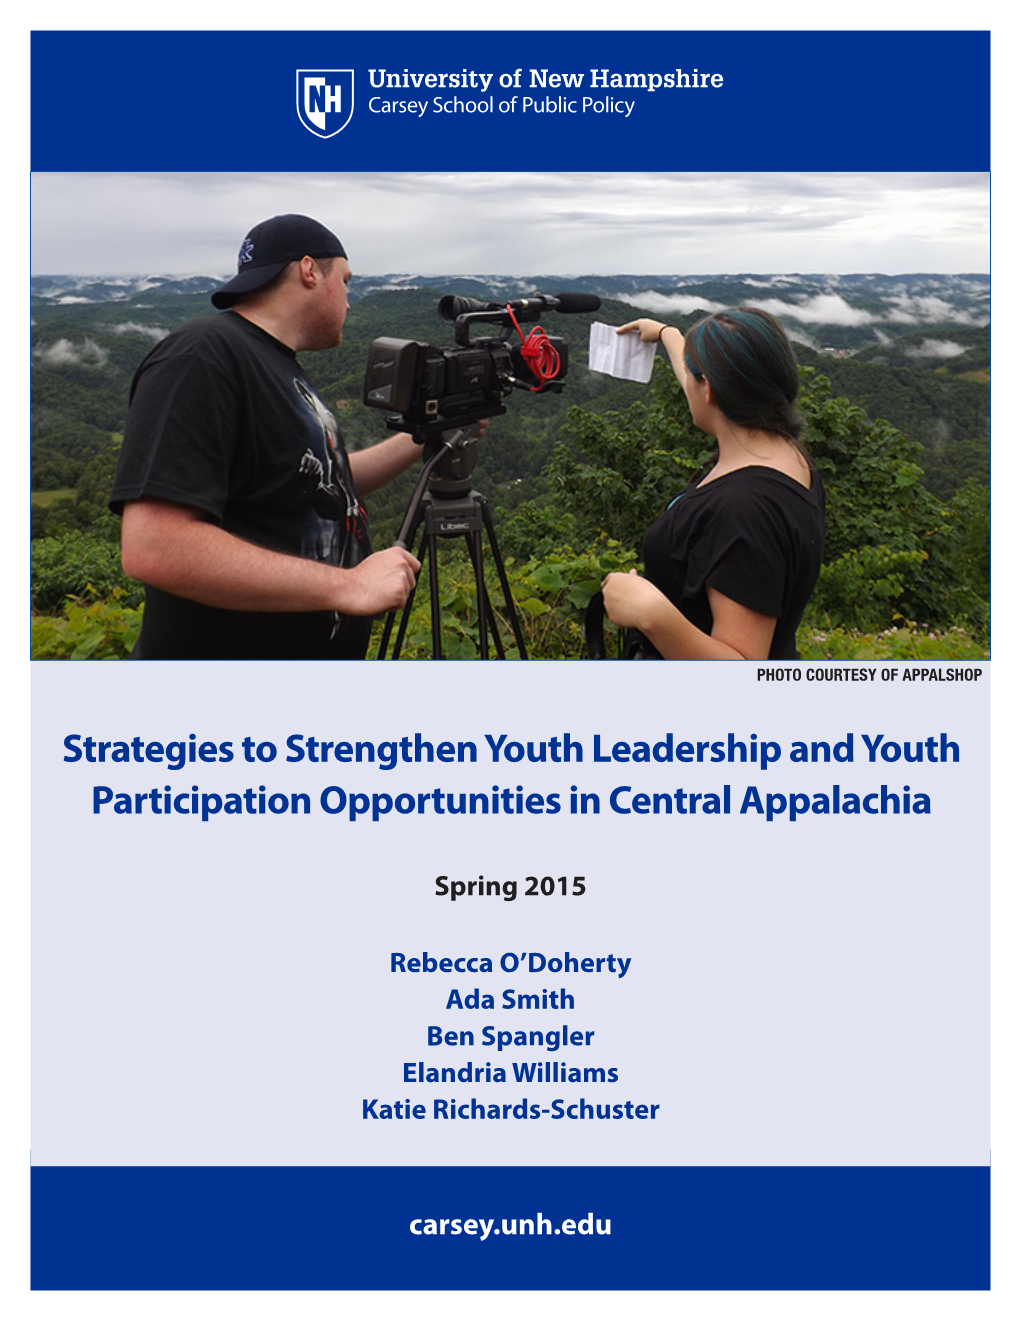 Strategies to Strengthen Youth Leadership and Youth Participation Opportunities in Central Appalachia